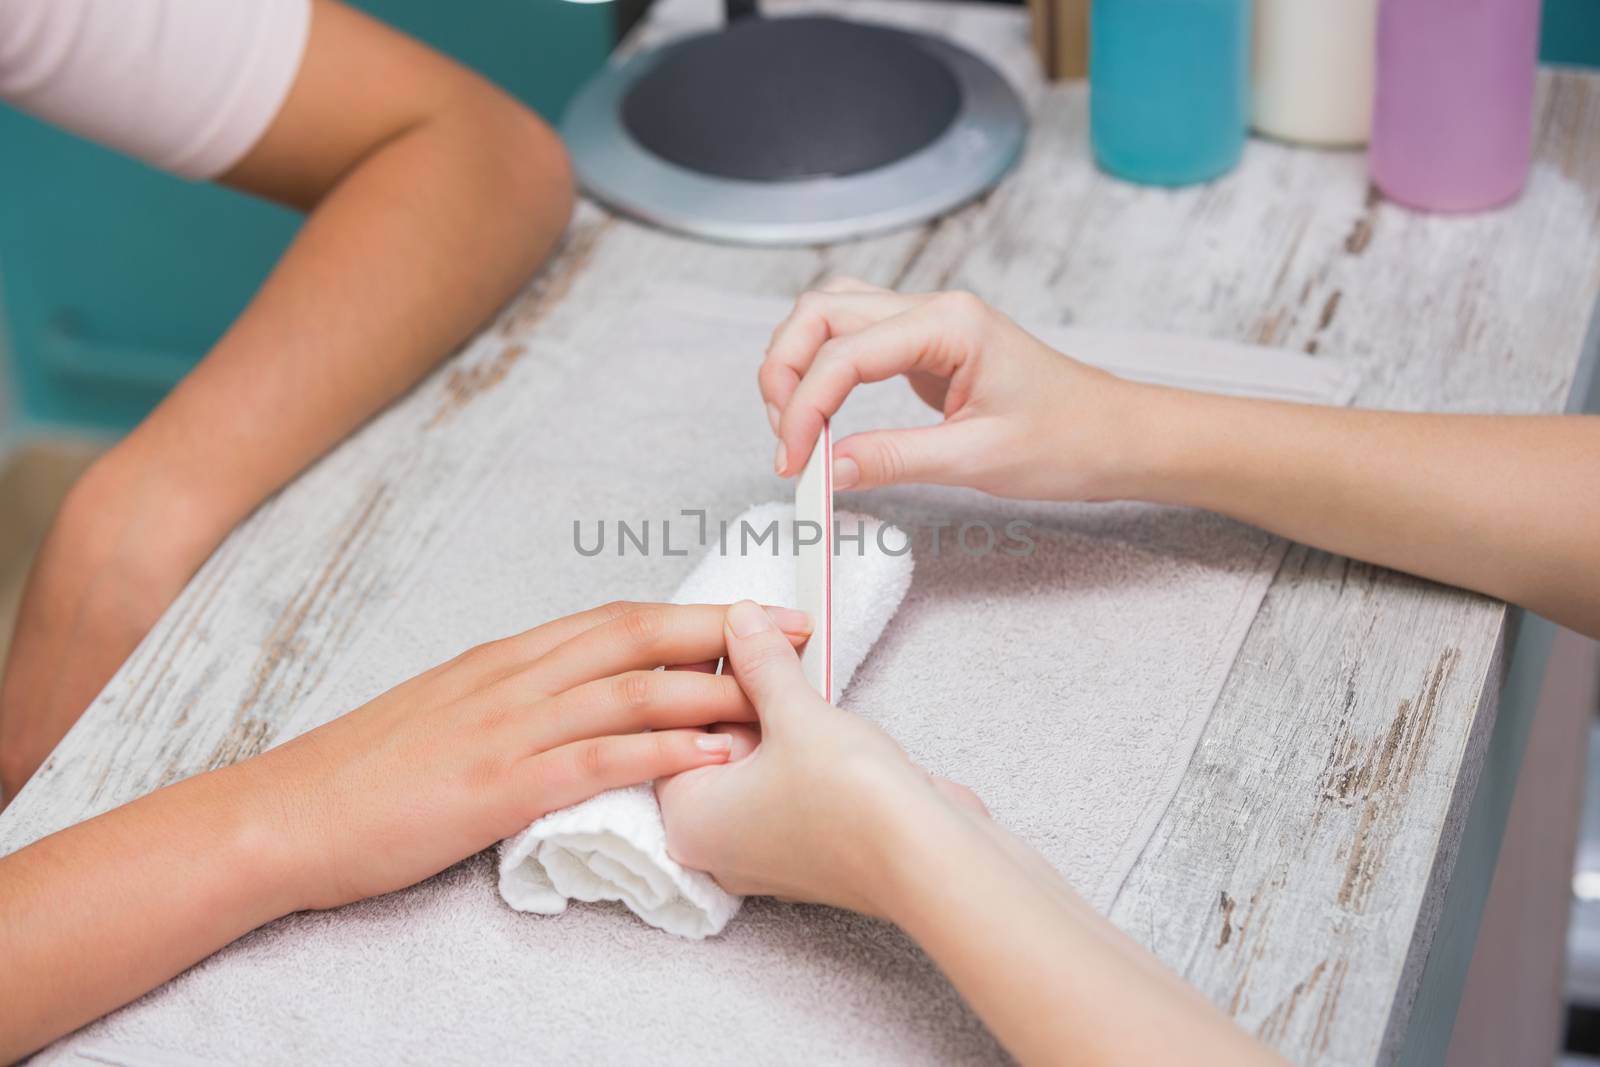 Nail technician giving manicure to customer by Wavebreakmedia